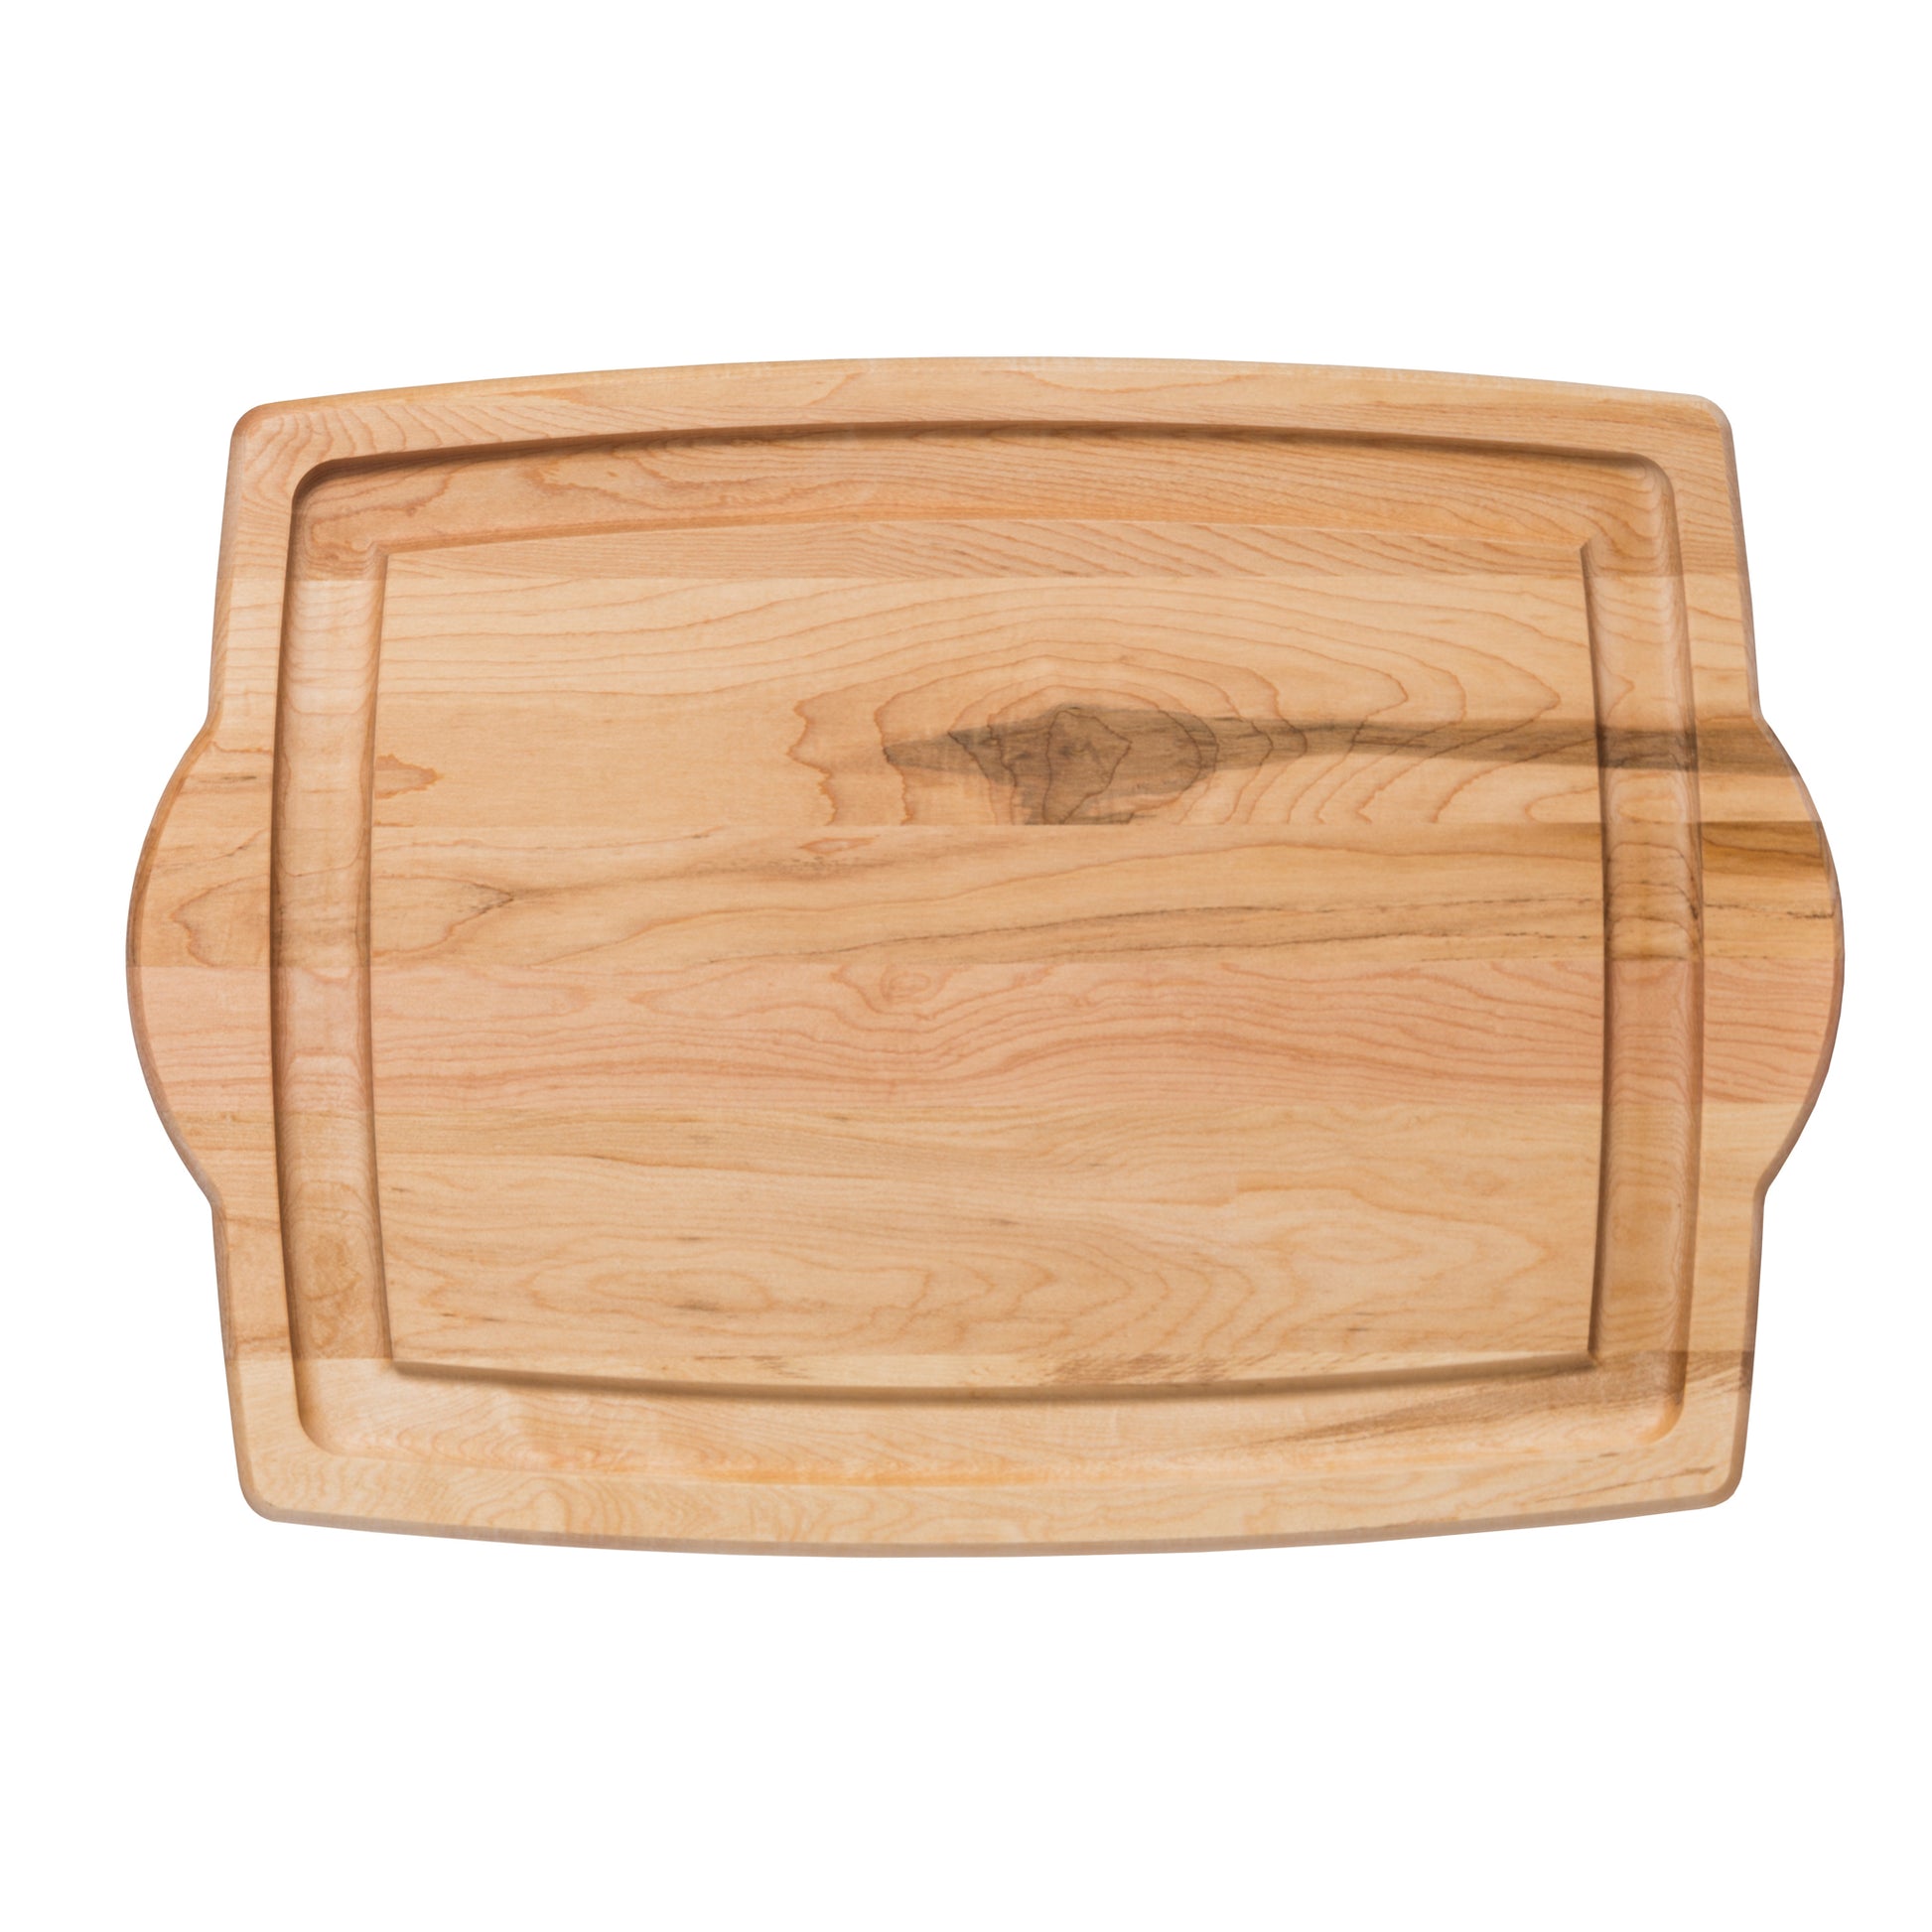 Maple Carving Board with Handles-20" x 14"